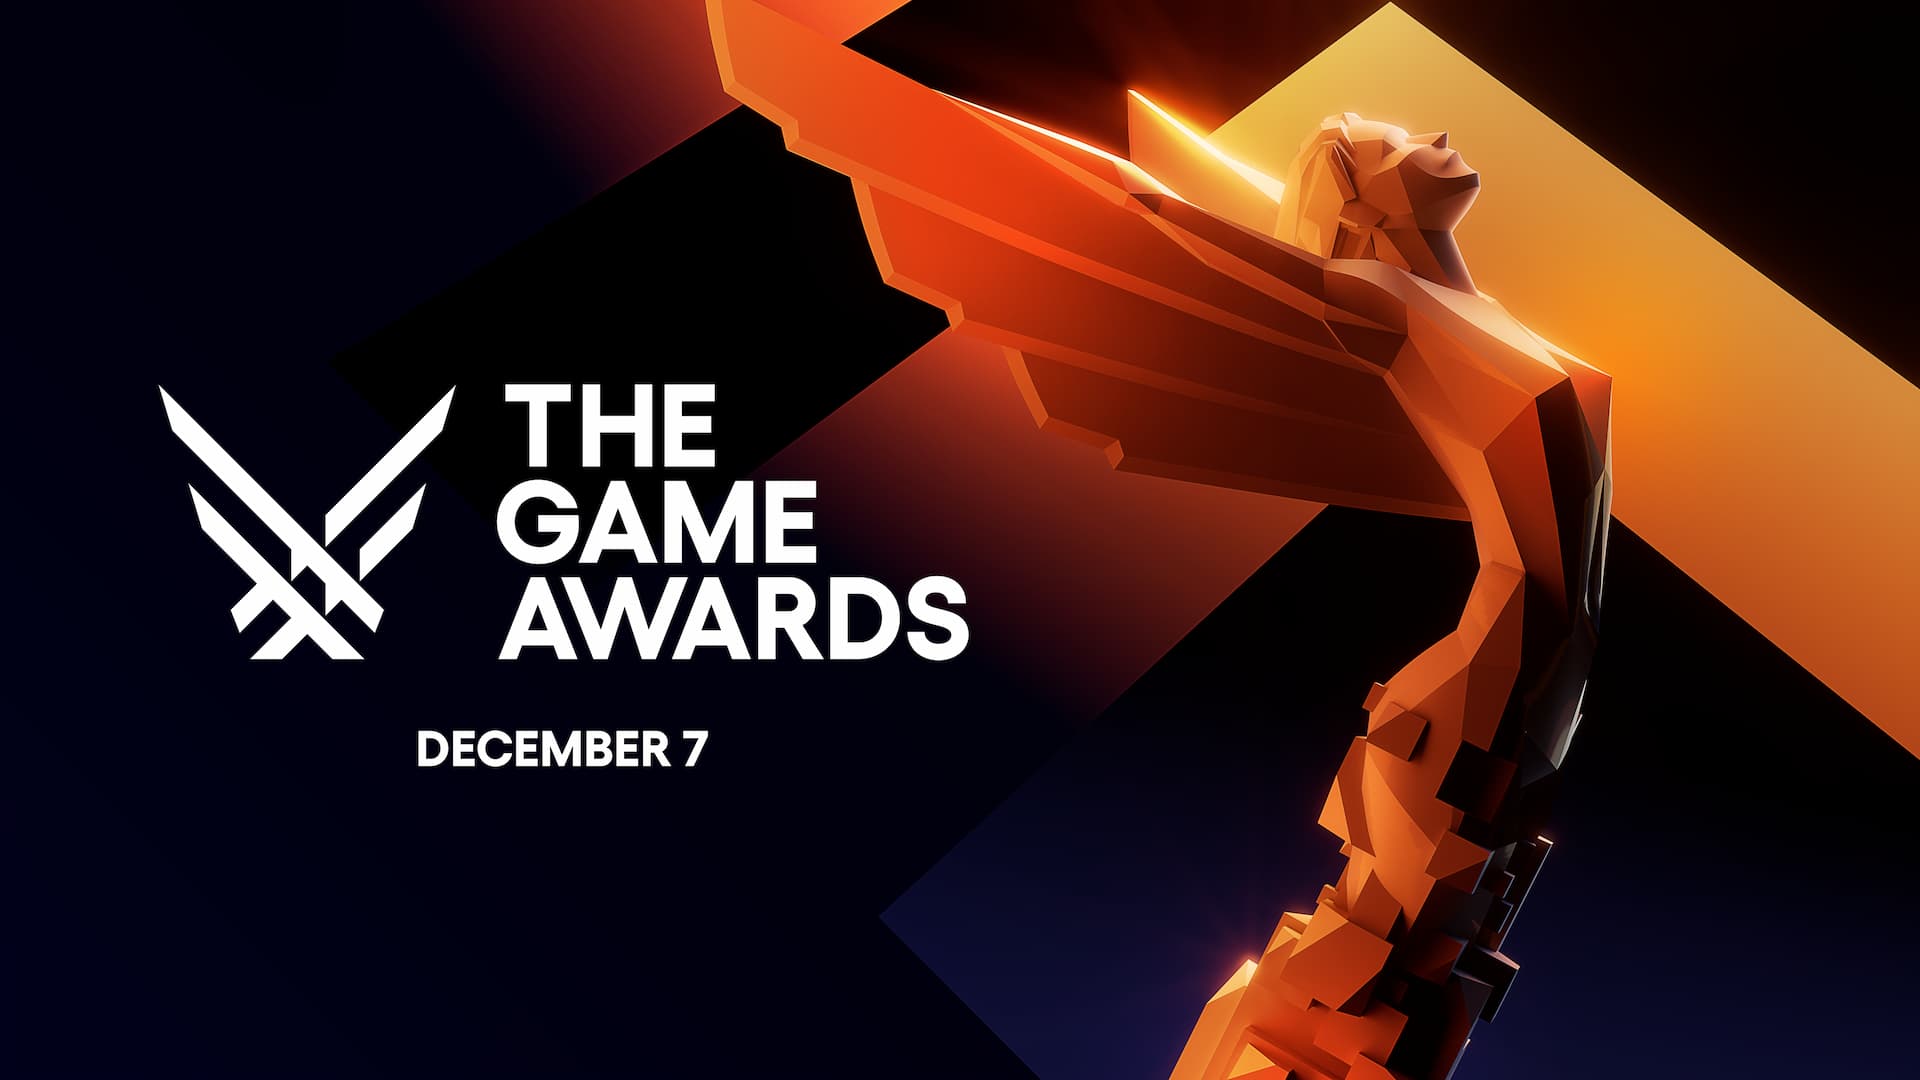 Game of the Year Awards 2020 - All the Winners